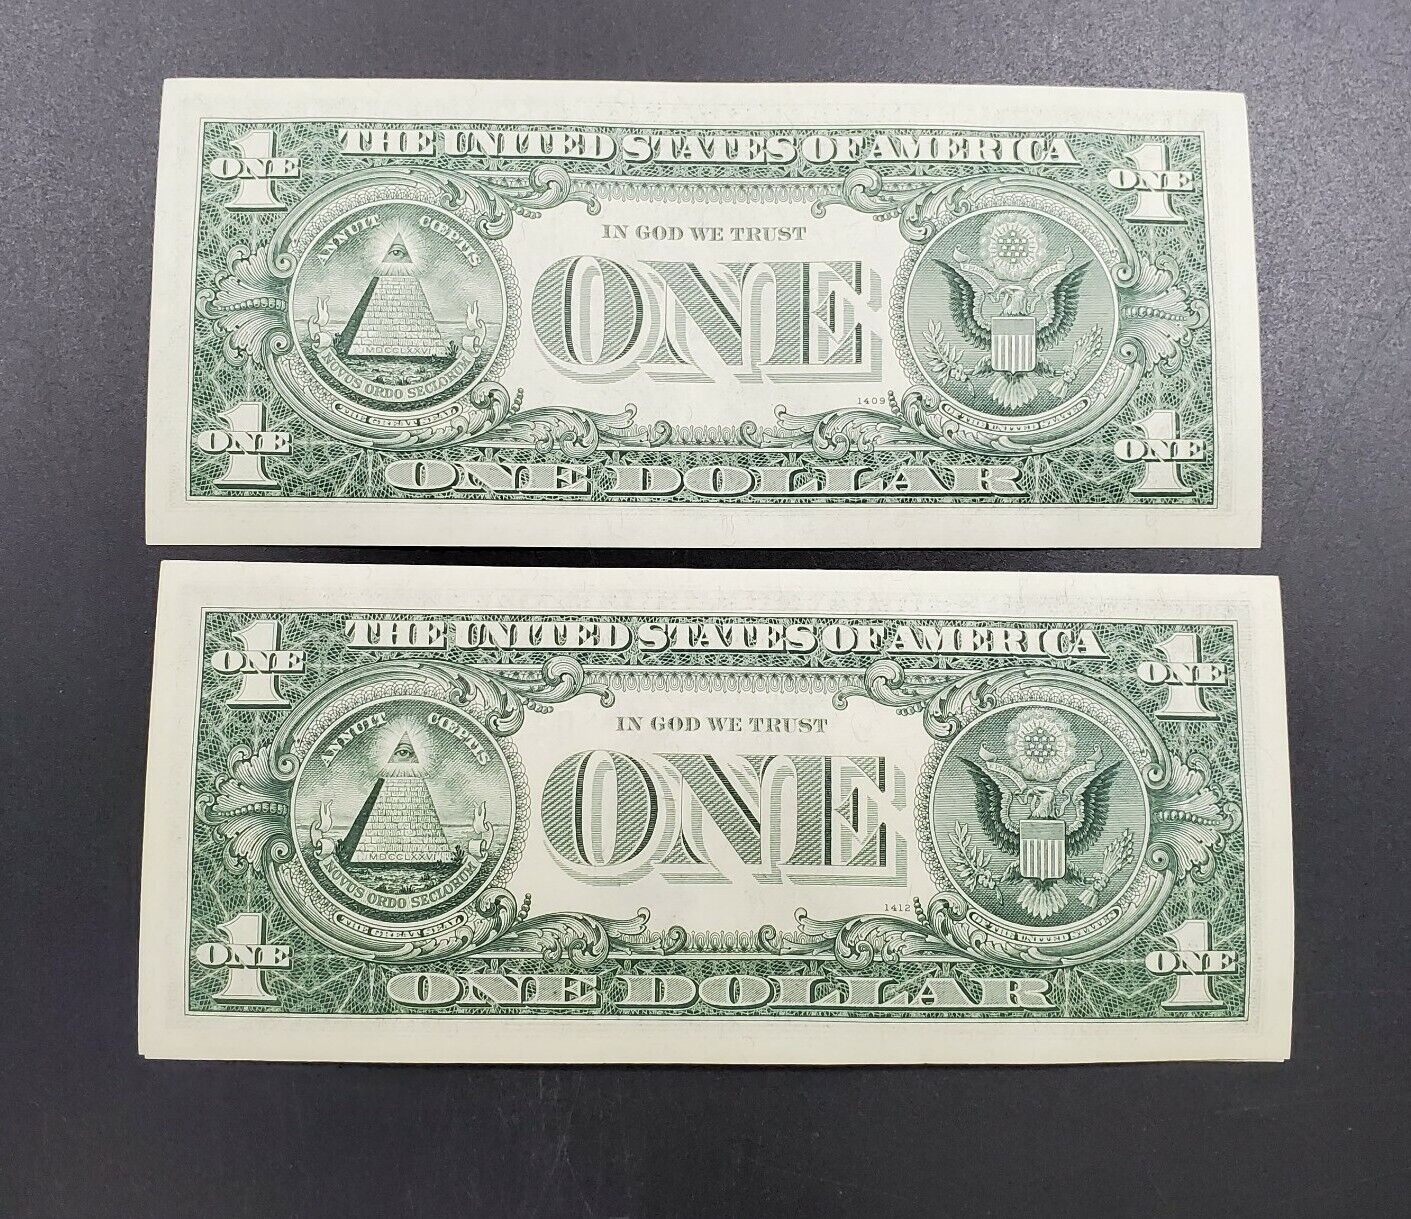 Lot 2 Consecutive 1969 B $1 CH UNC FRN Federal Reserve Bill Note Uncirculated 2